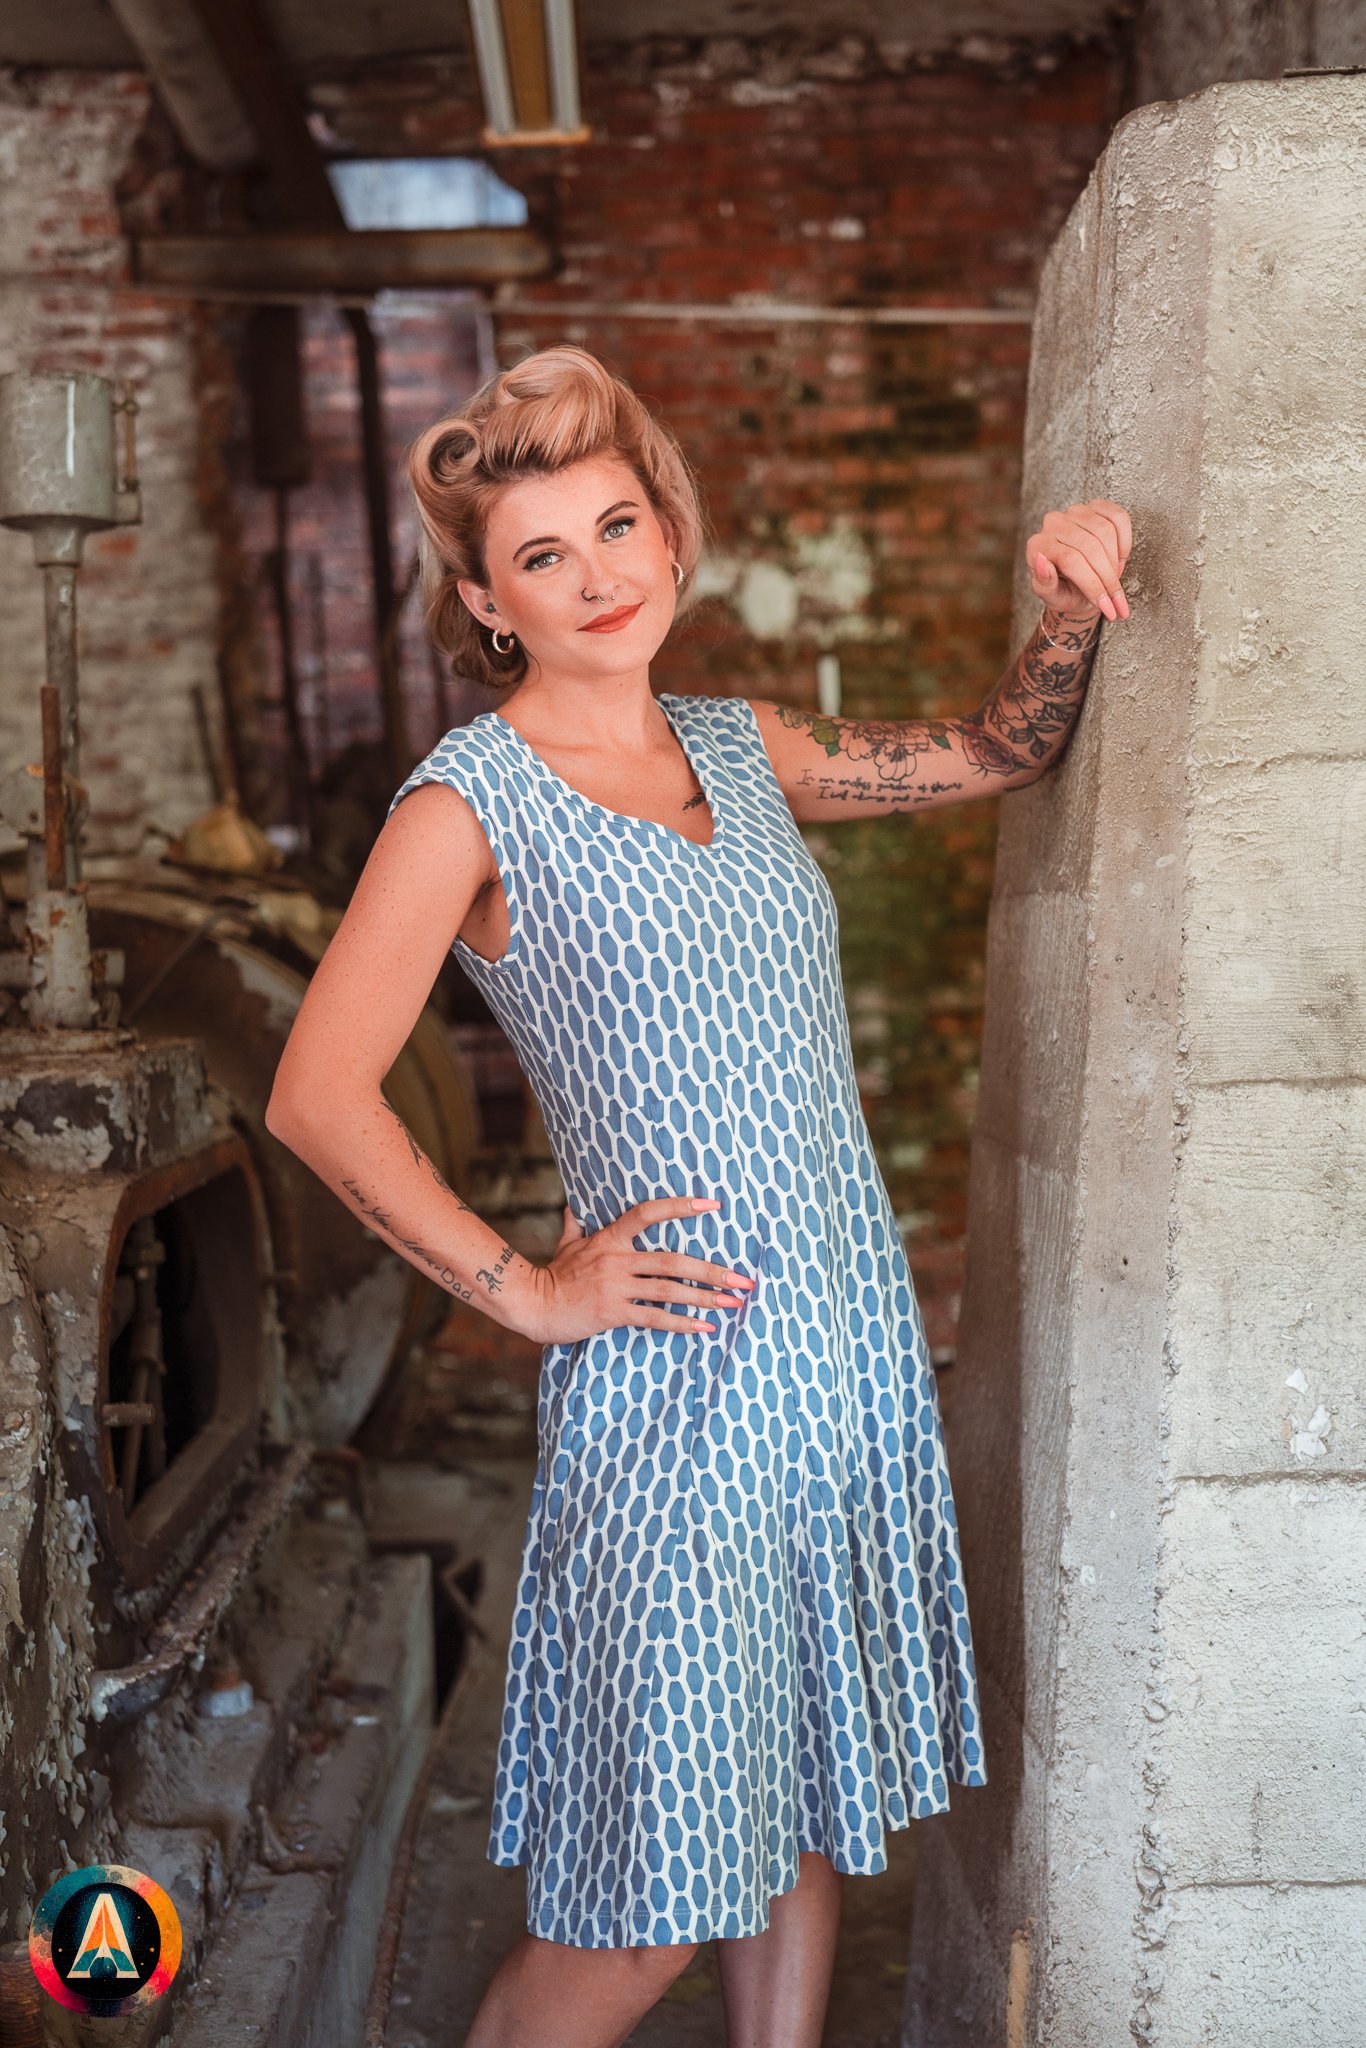 Blonde model courtney france poses in an abandoned shop / laundromat in pinup attire.